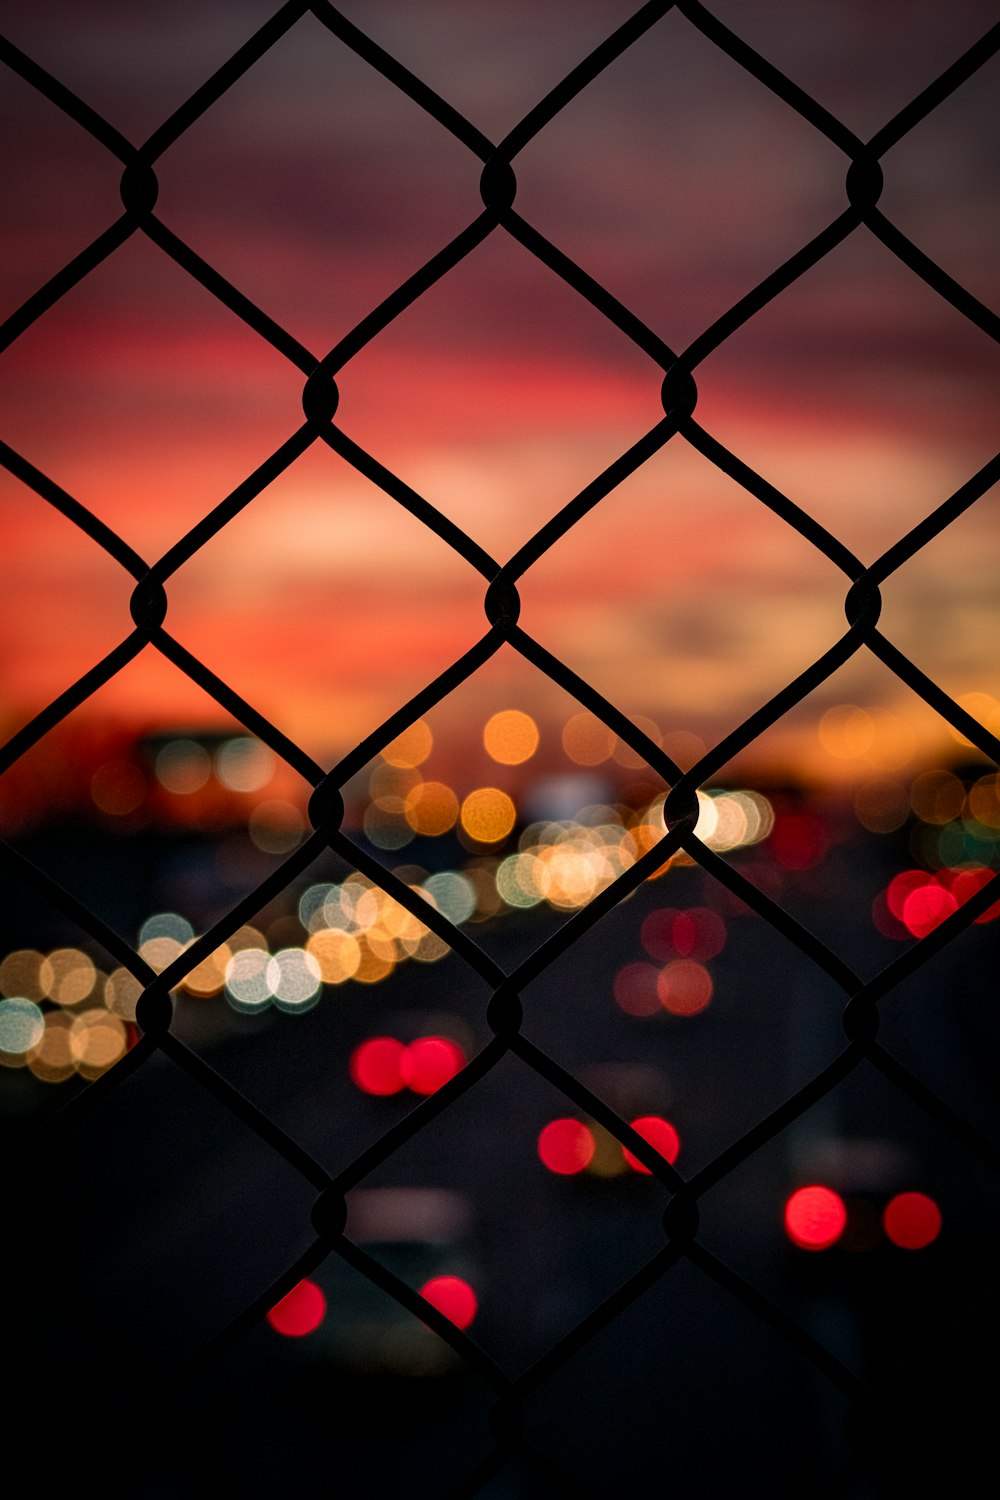 bokeh photography of chain link fence